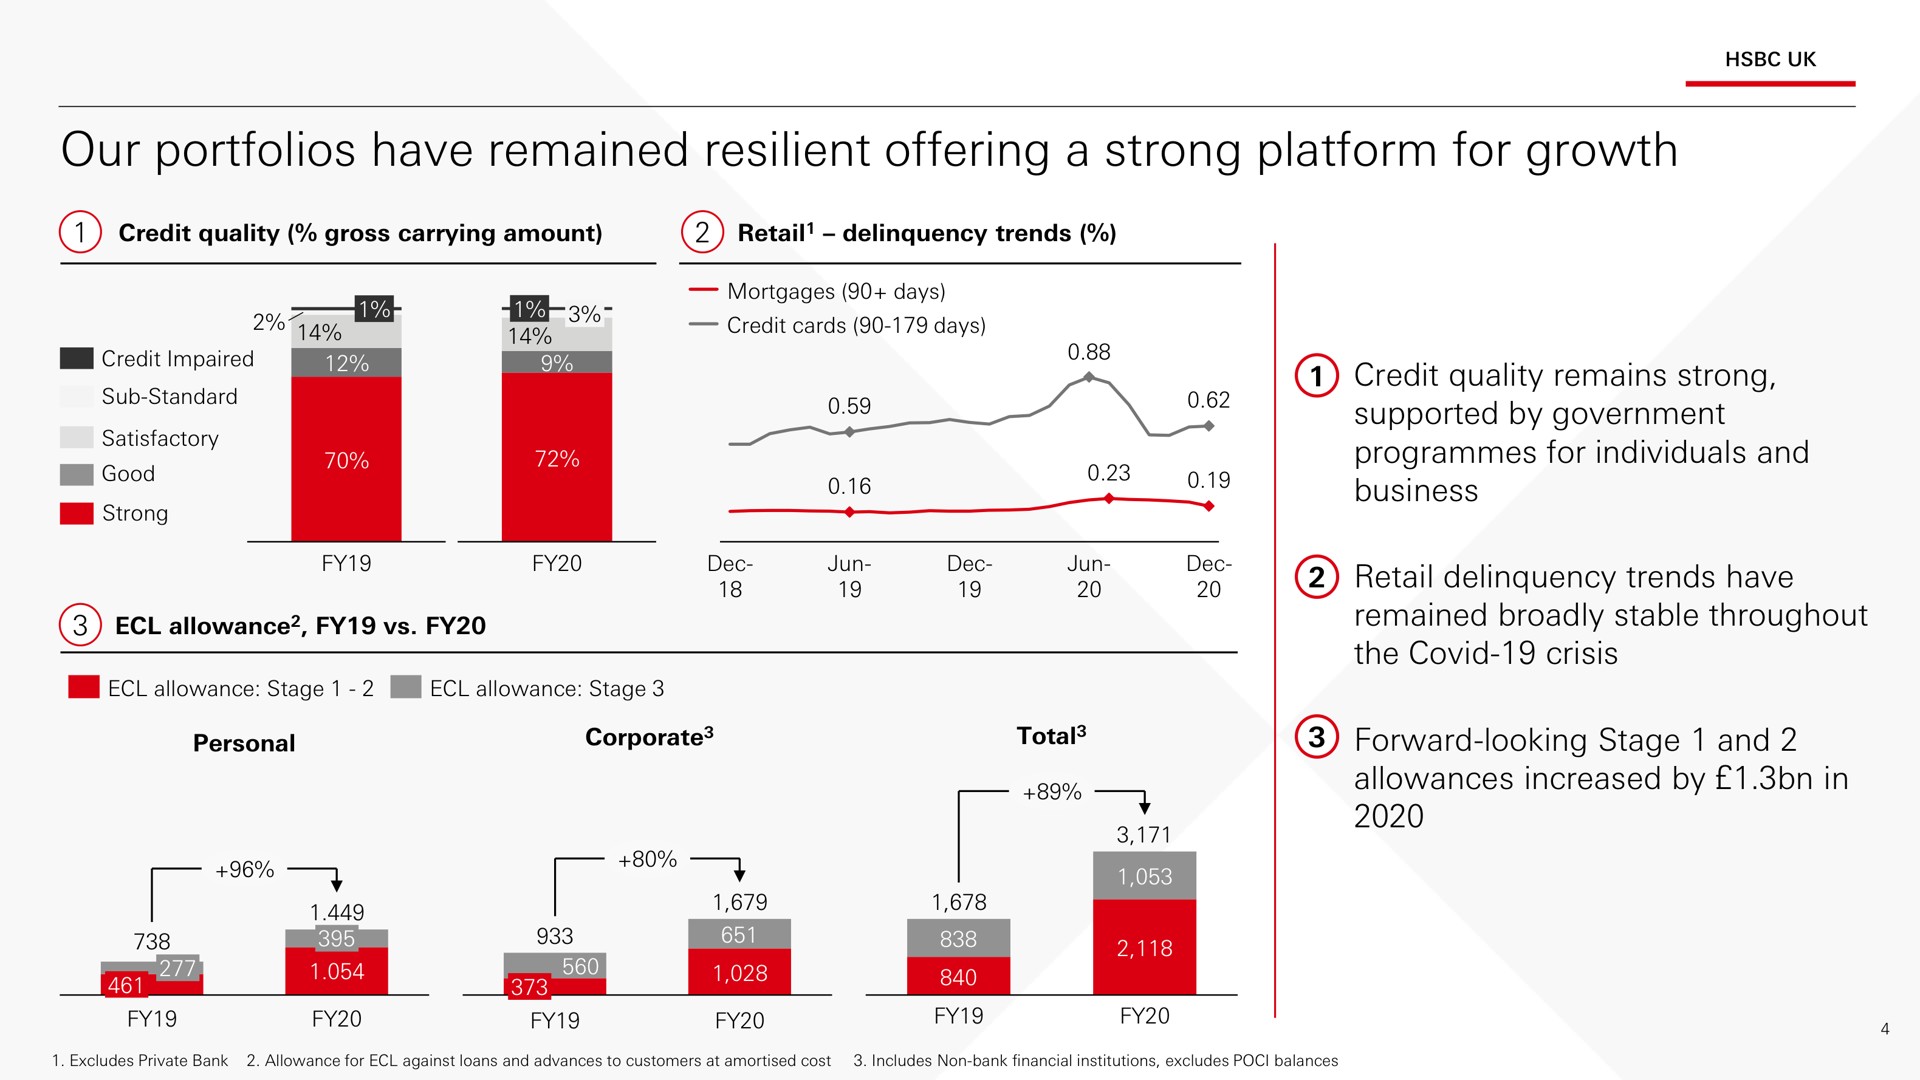 our portfolios have remained resilient offering a strong platform for growth | HSBC